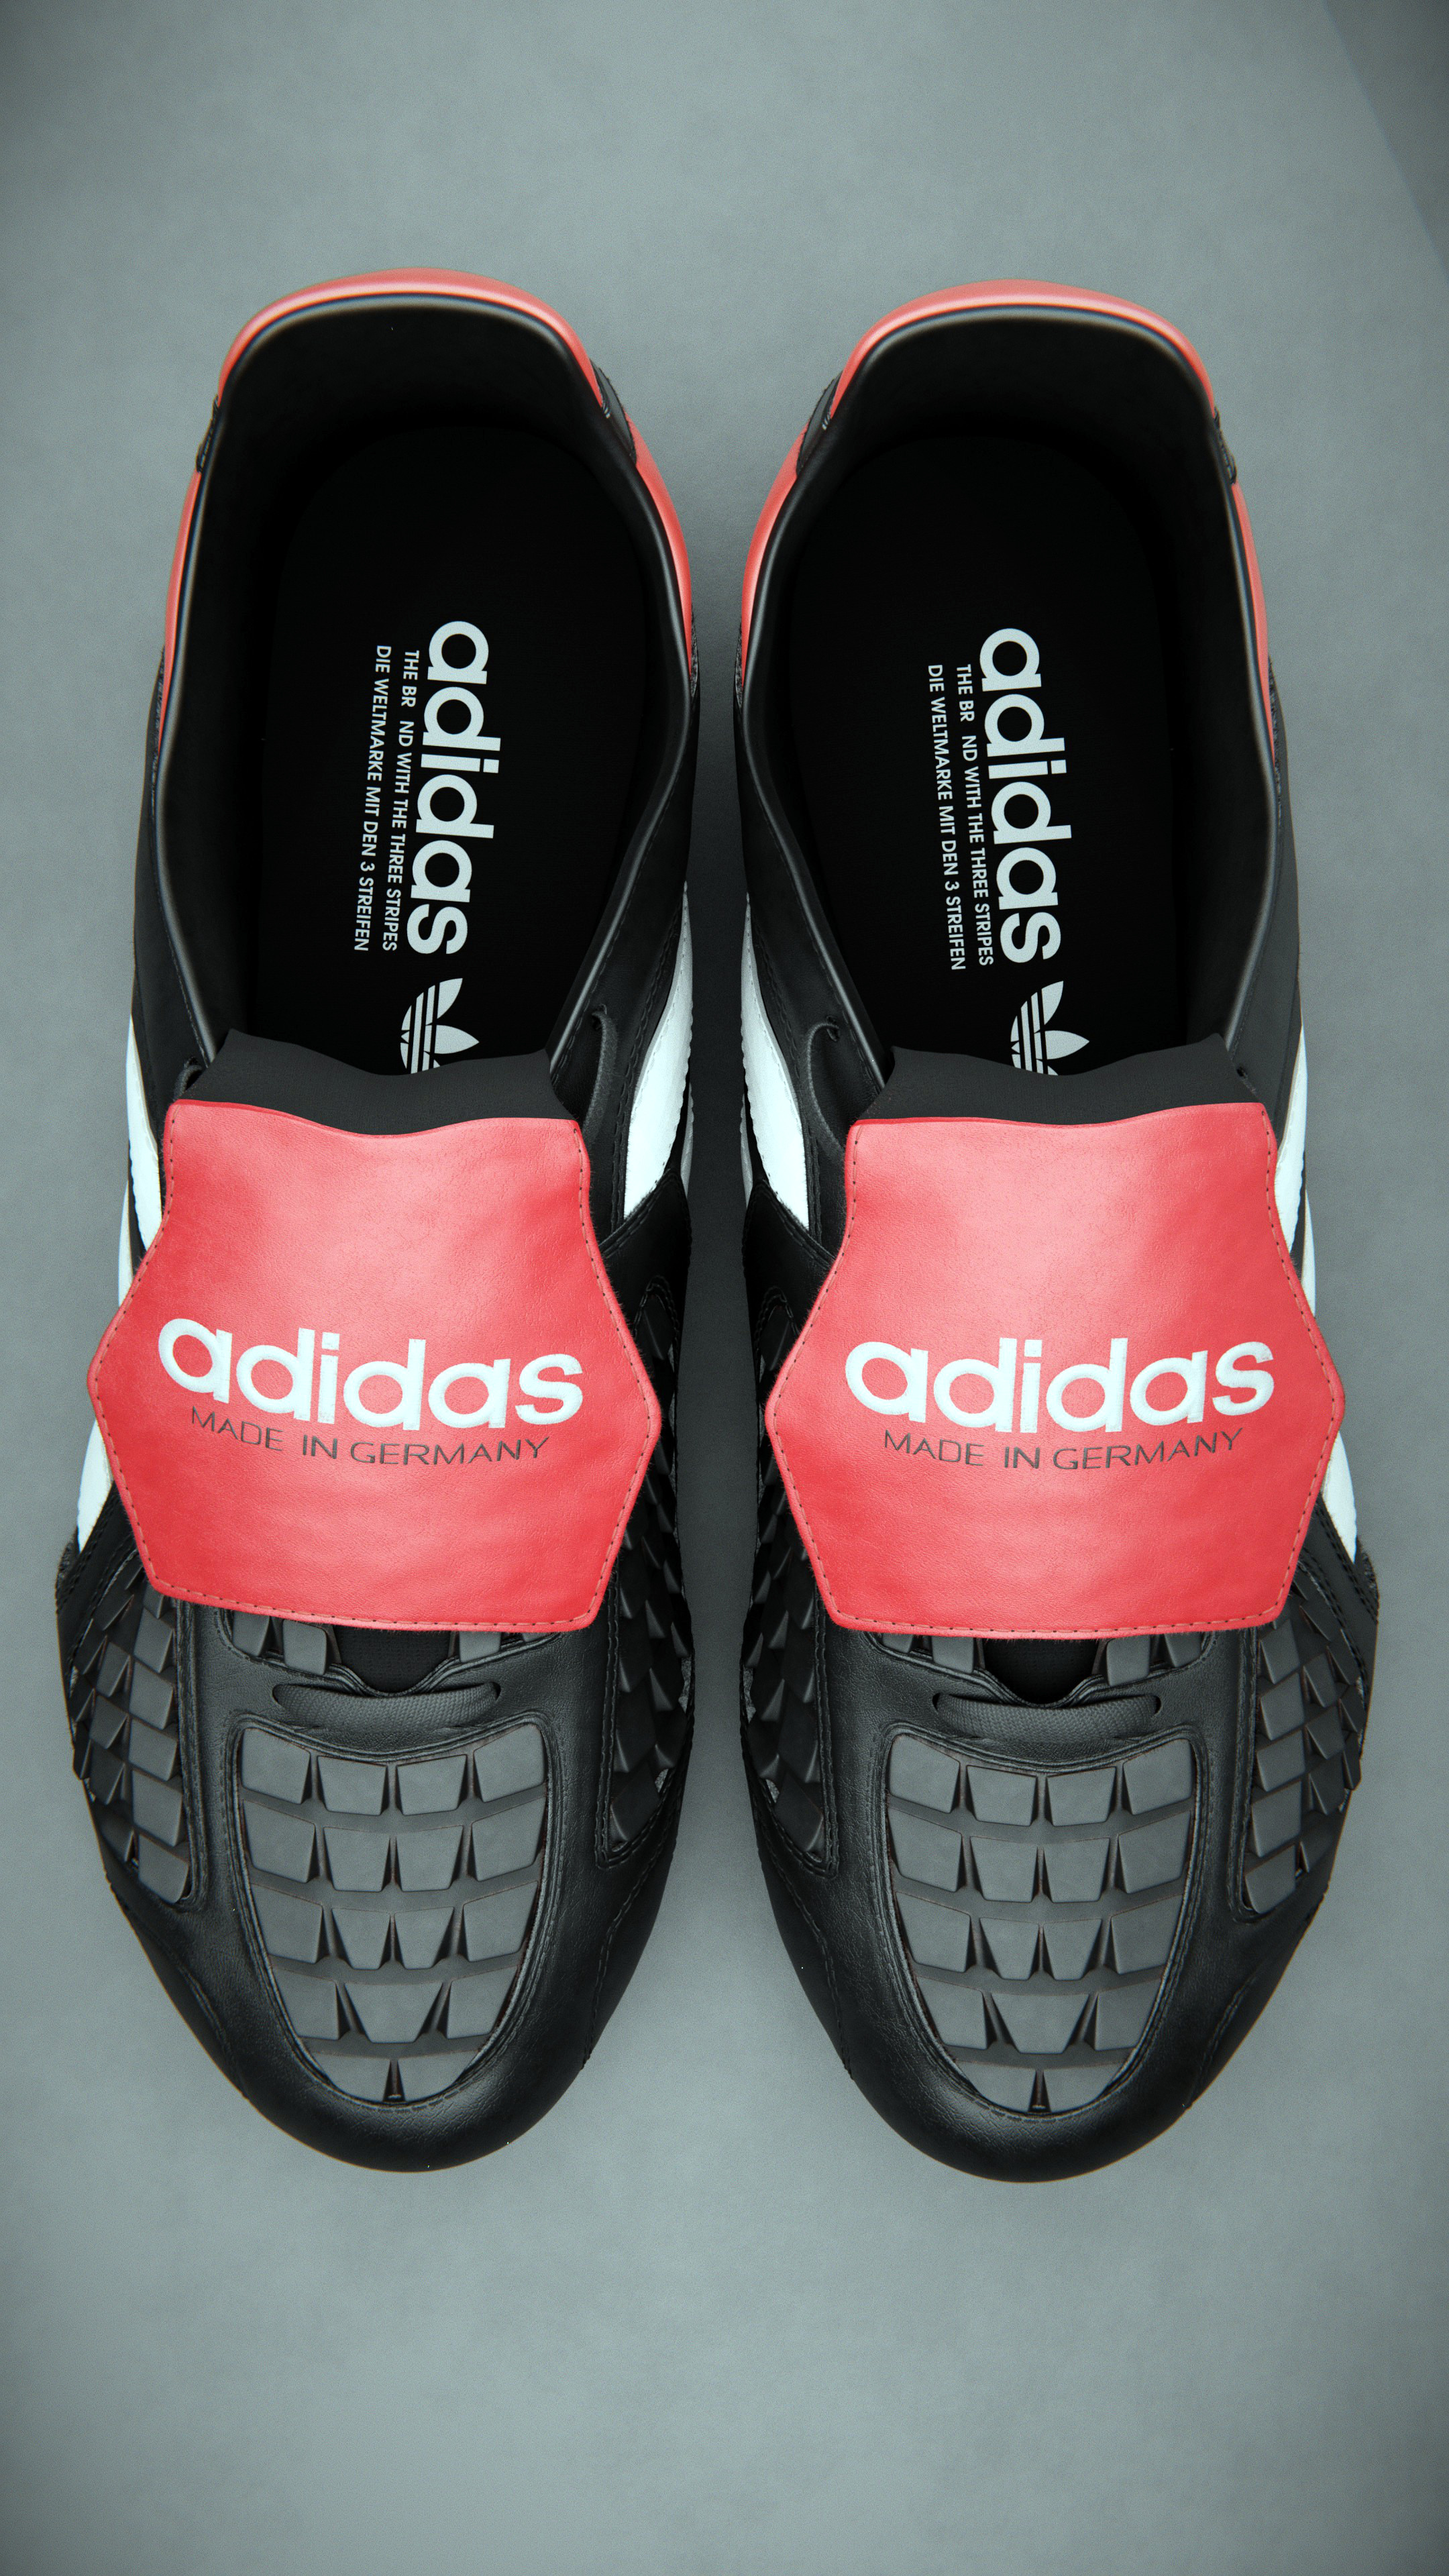 Adidas Predator Touch 96 - Finished Projects - Blender Artists Community